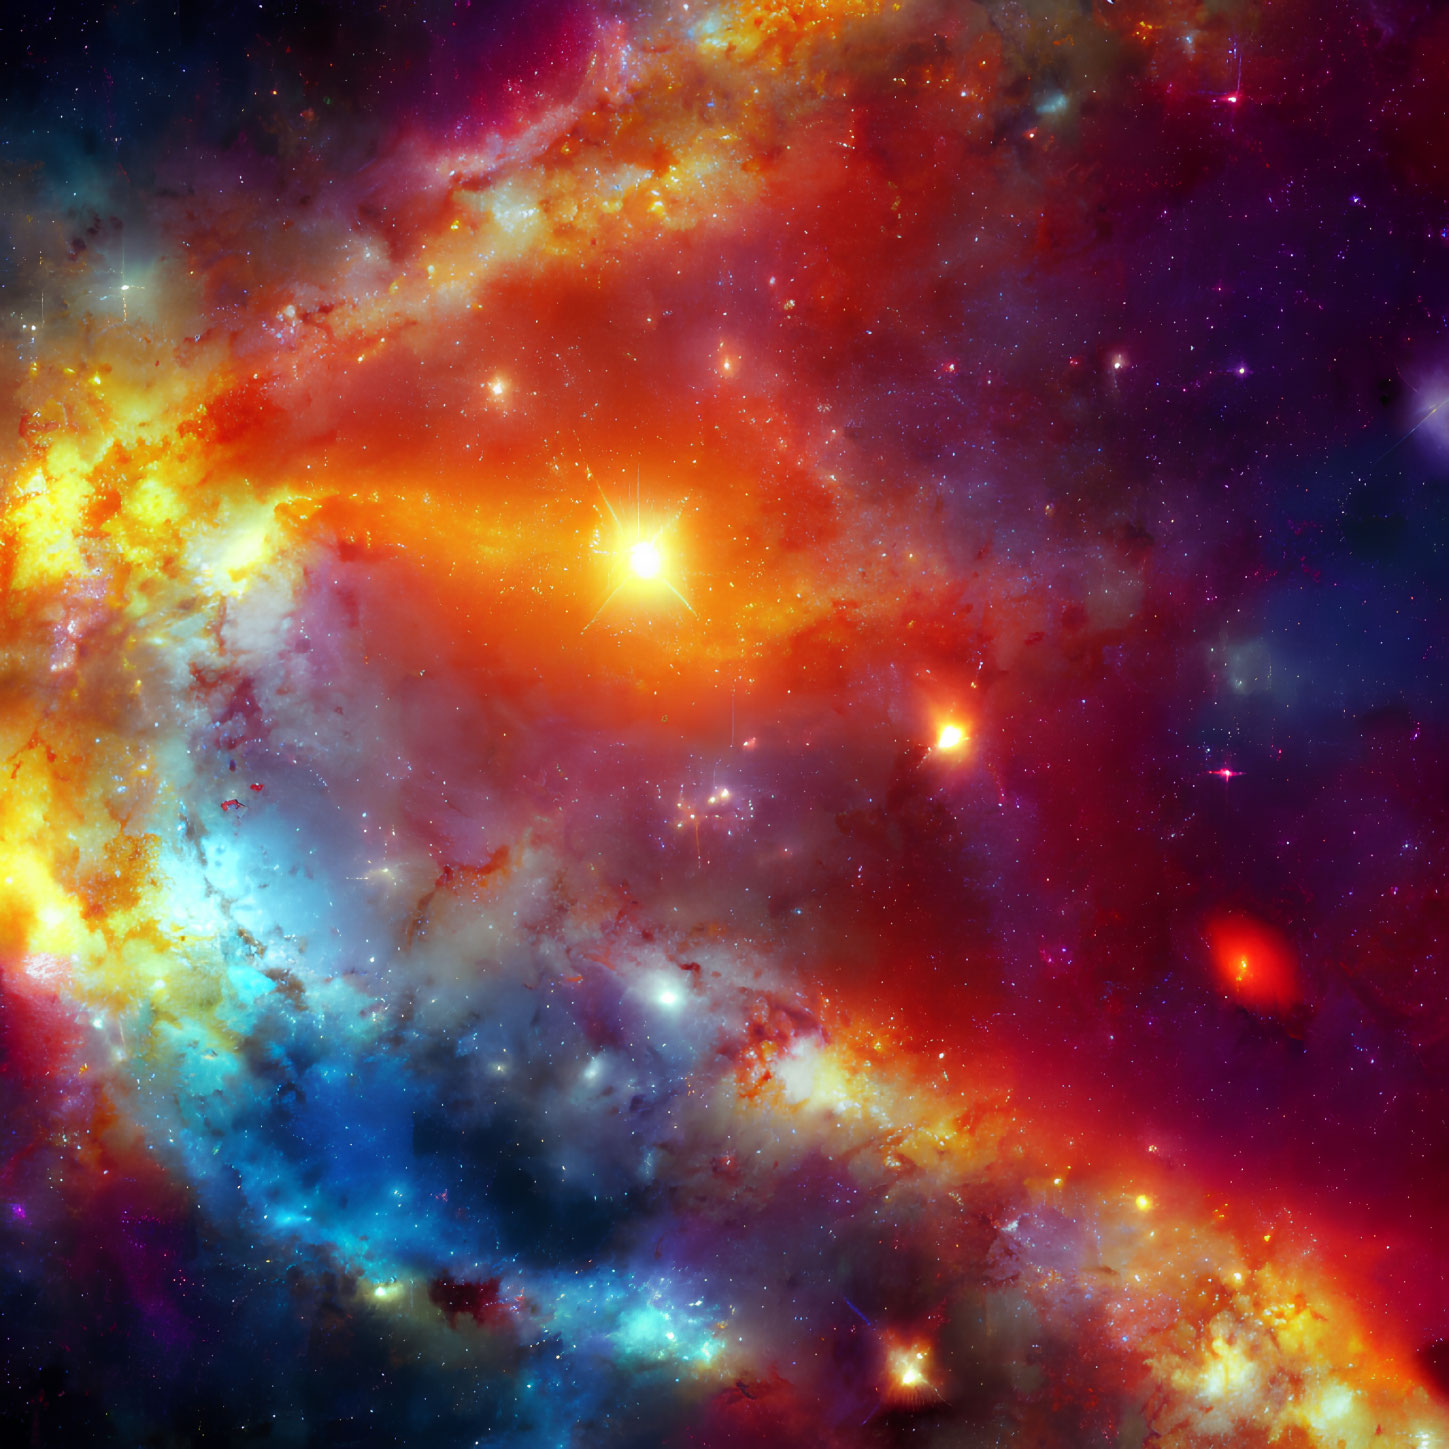 Colorful cosmic scene with swirling clouds and bright stars in space